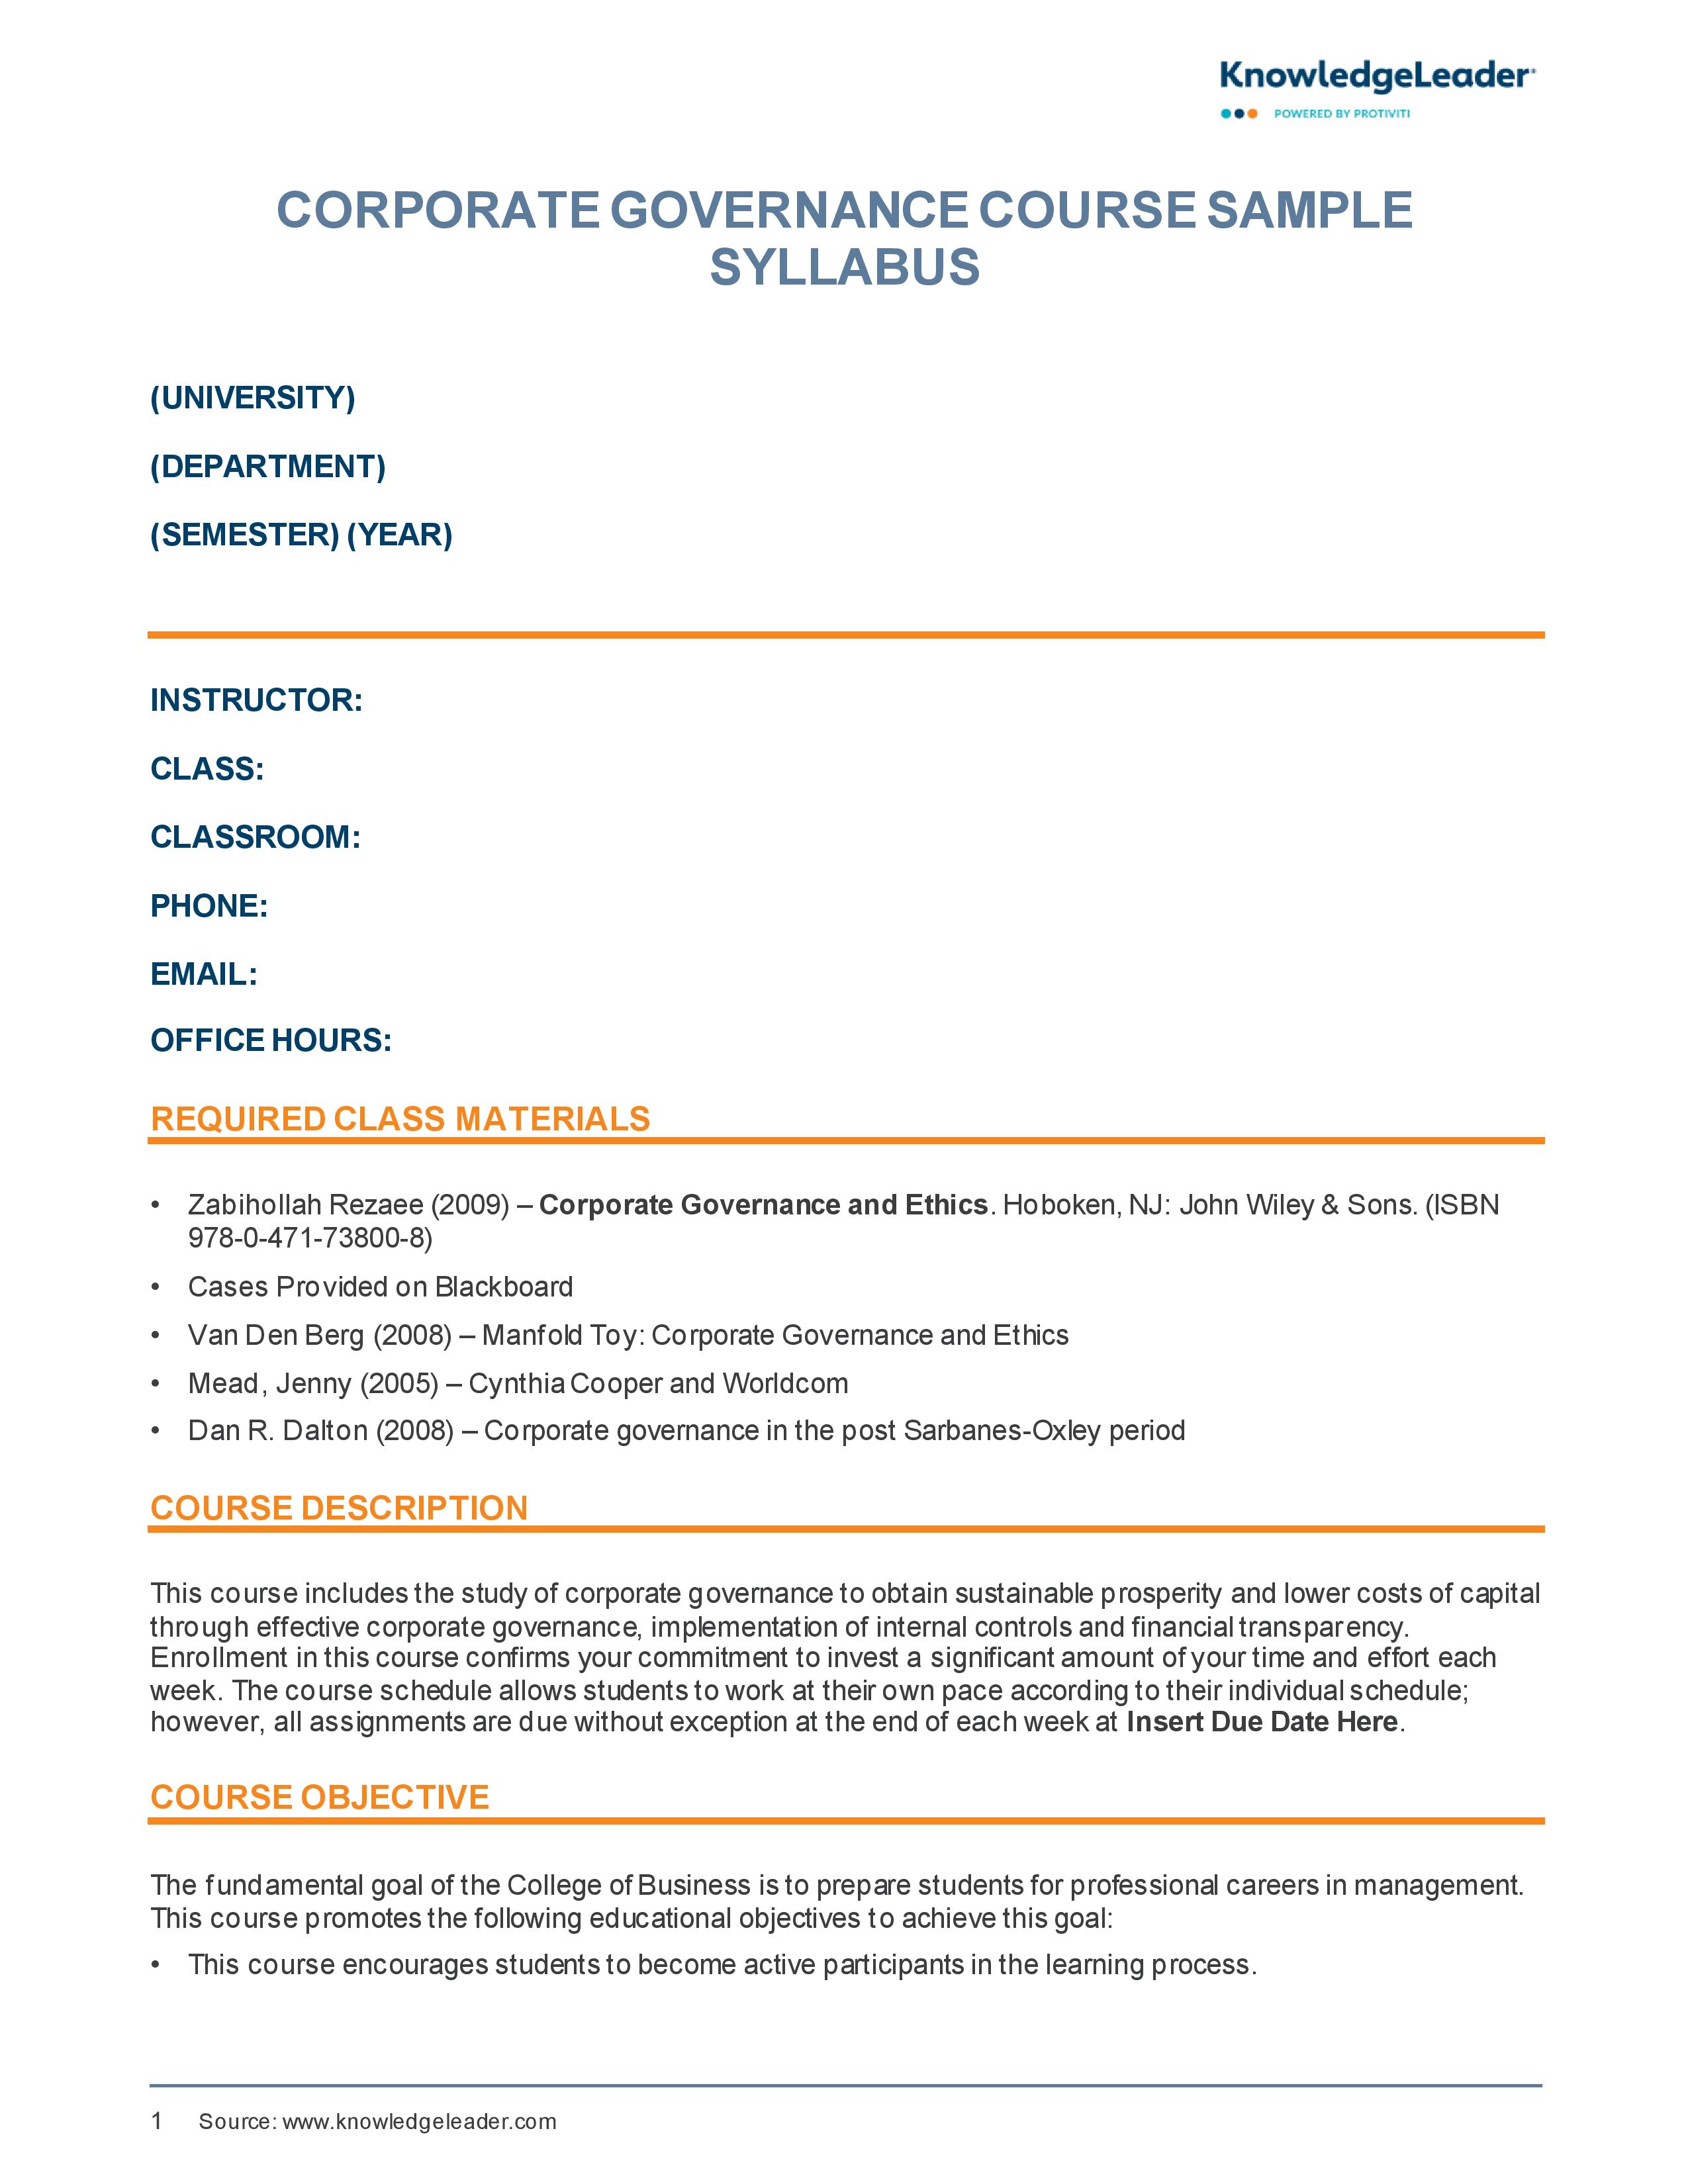 Screenshot of the first page of Corporate Governance Sample Syllabus